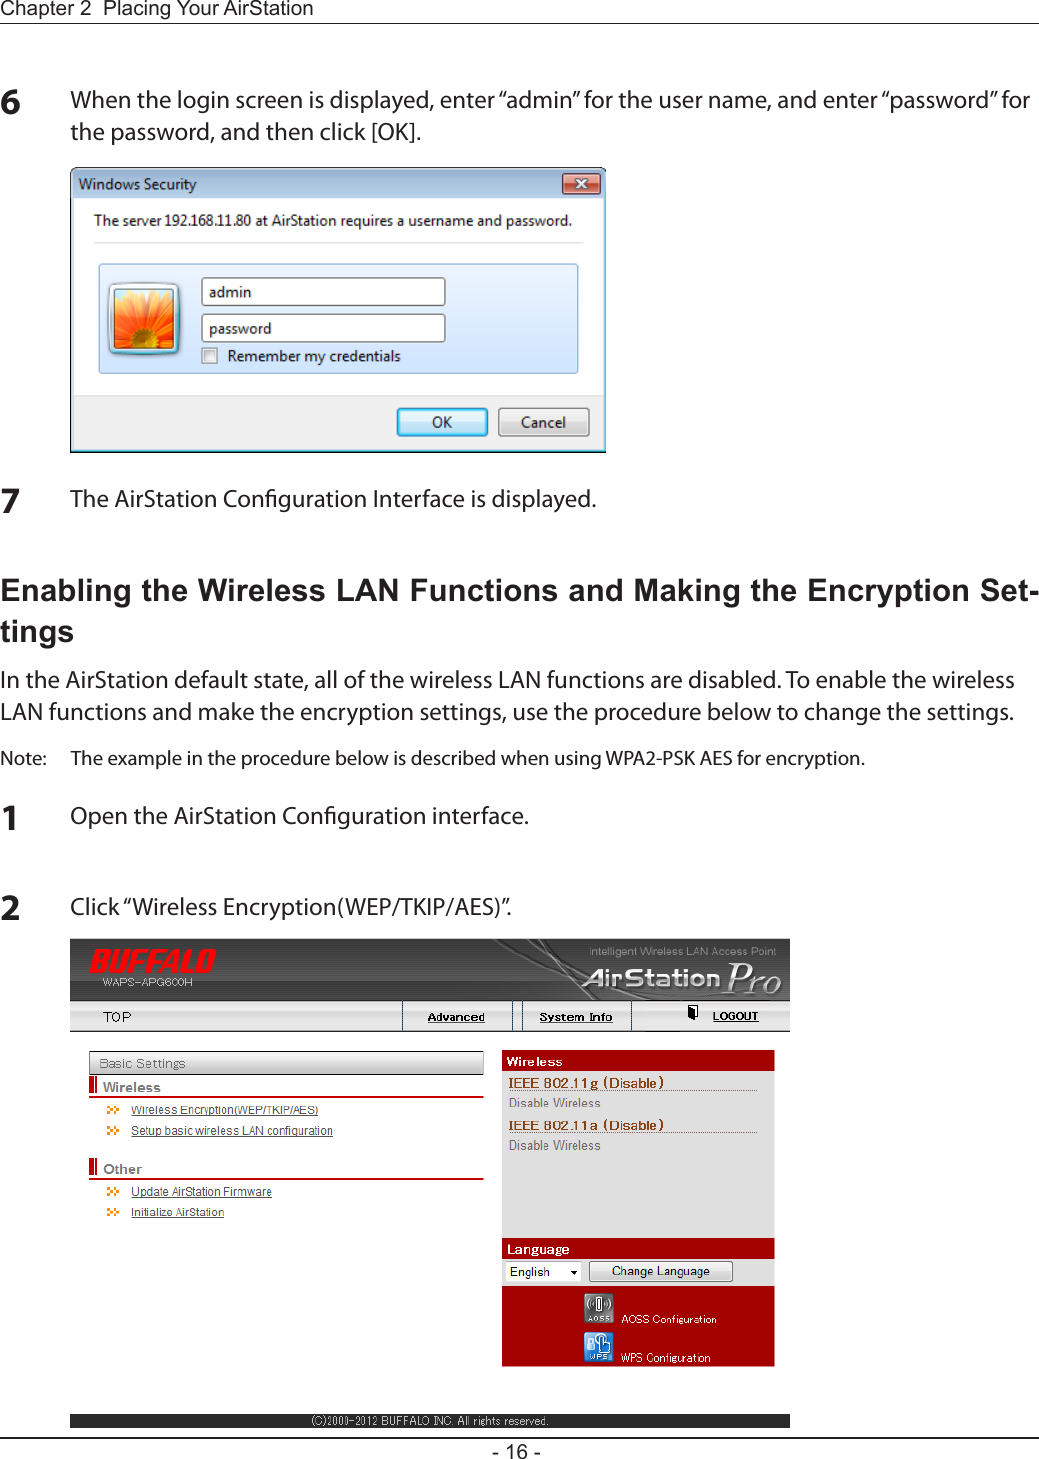 - 16 -Chapter 2  Placing Your AirStationEnabling the Wireless LAN Functions and Making the Encryption Set-tingsIn the AirStation default state, all of the wireless LAN functions are disabled. To enable the wireless LAN functions and make the encryption settings, use the procedure below to change the settings.Note:  The example in the procedure below is described when using WPA2-PSK AES for encryption.1Open the AirStation Conguration interface.2Click “Wireless Encryption(WEP/TKIP/AES)”.6When the login screen is displayed, enter “admin” for the user name, and enter “password” for the password, and then click [OK].7The AirStation Conguration Interface is displayed.